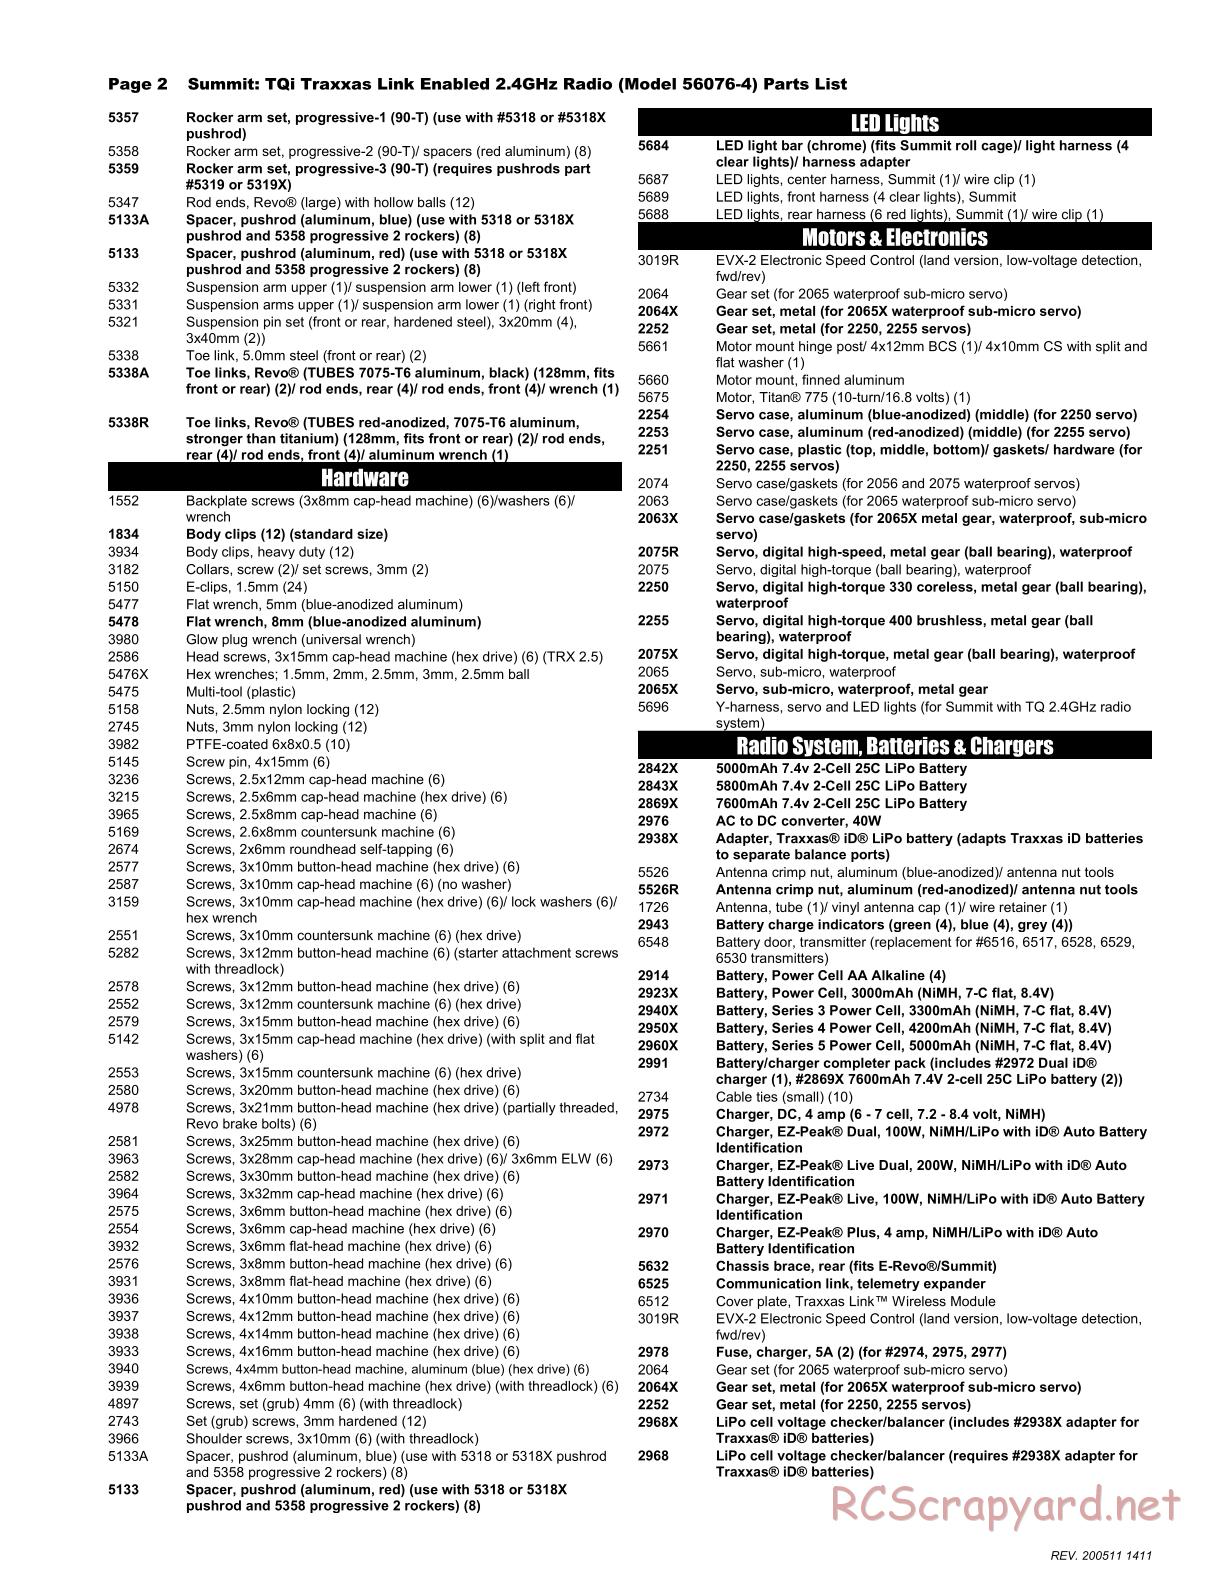 Traxxas - Summit - Parts List - Page 2